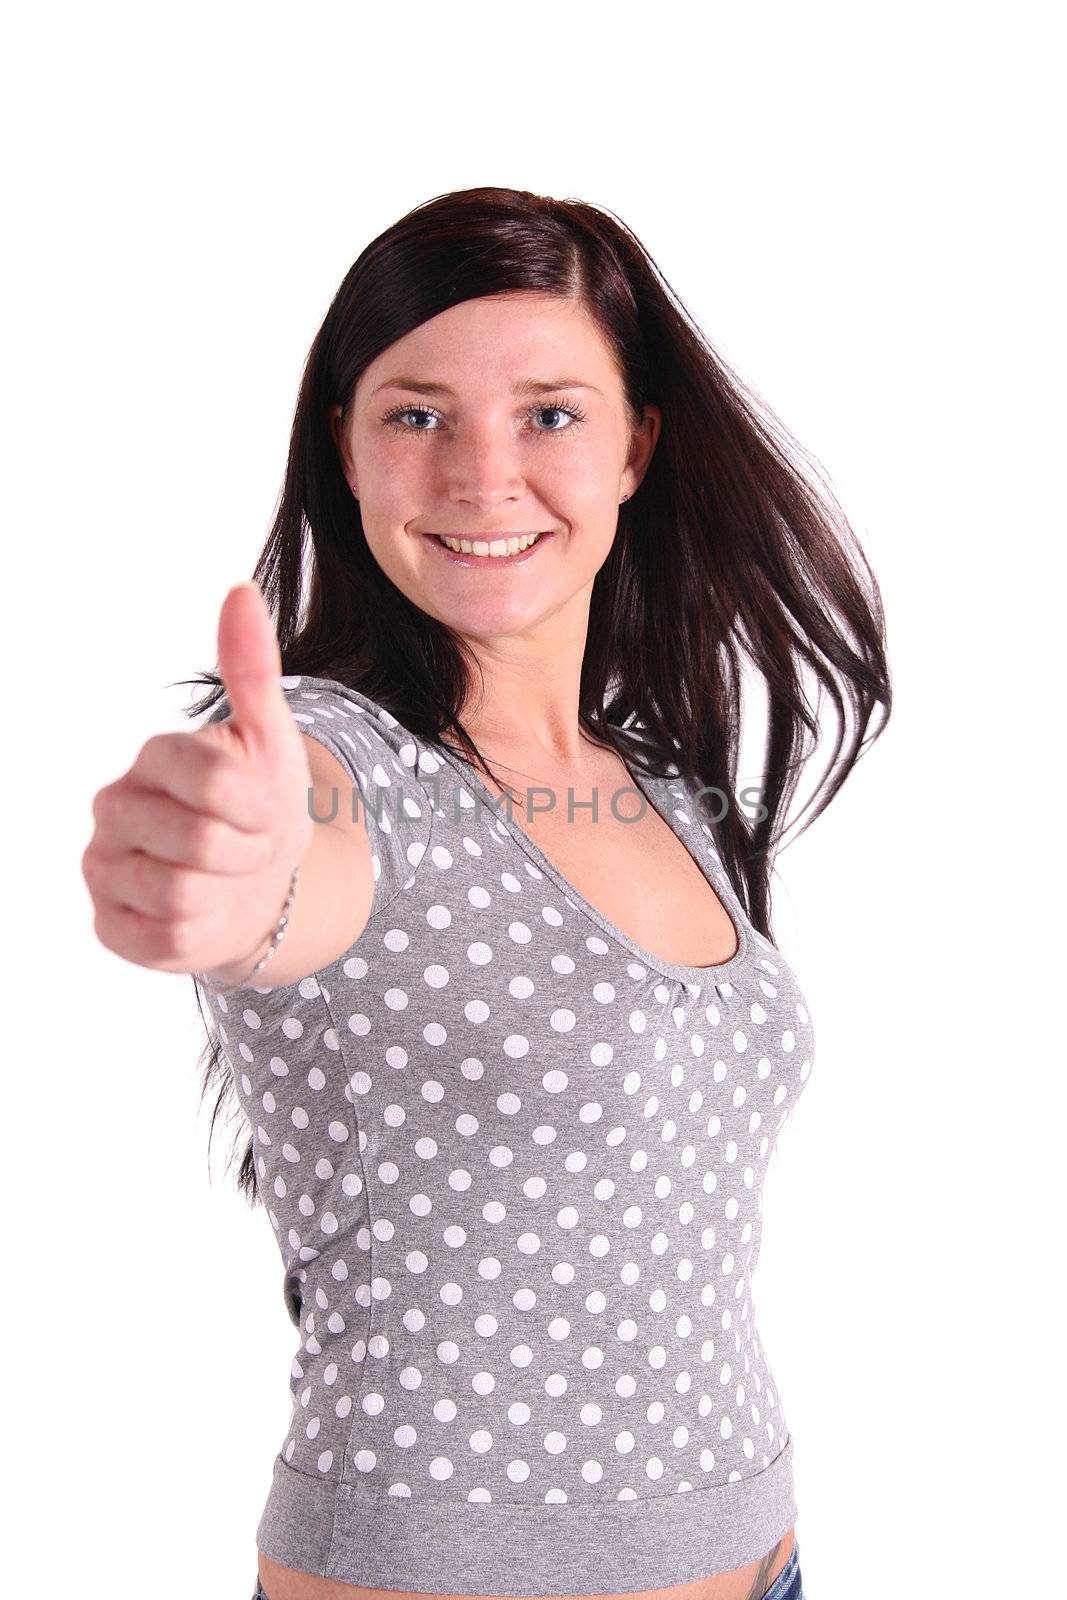 A young handsome woman praises someone. All isolated on white background.